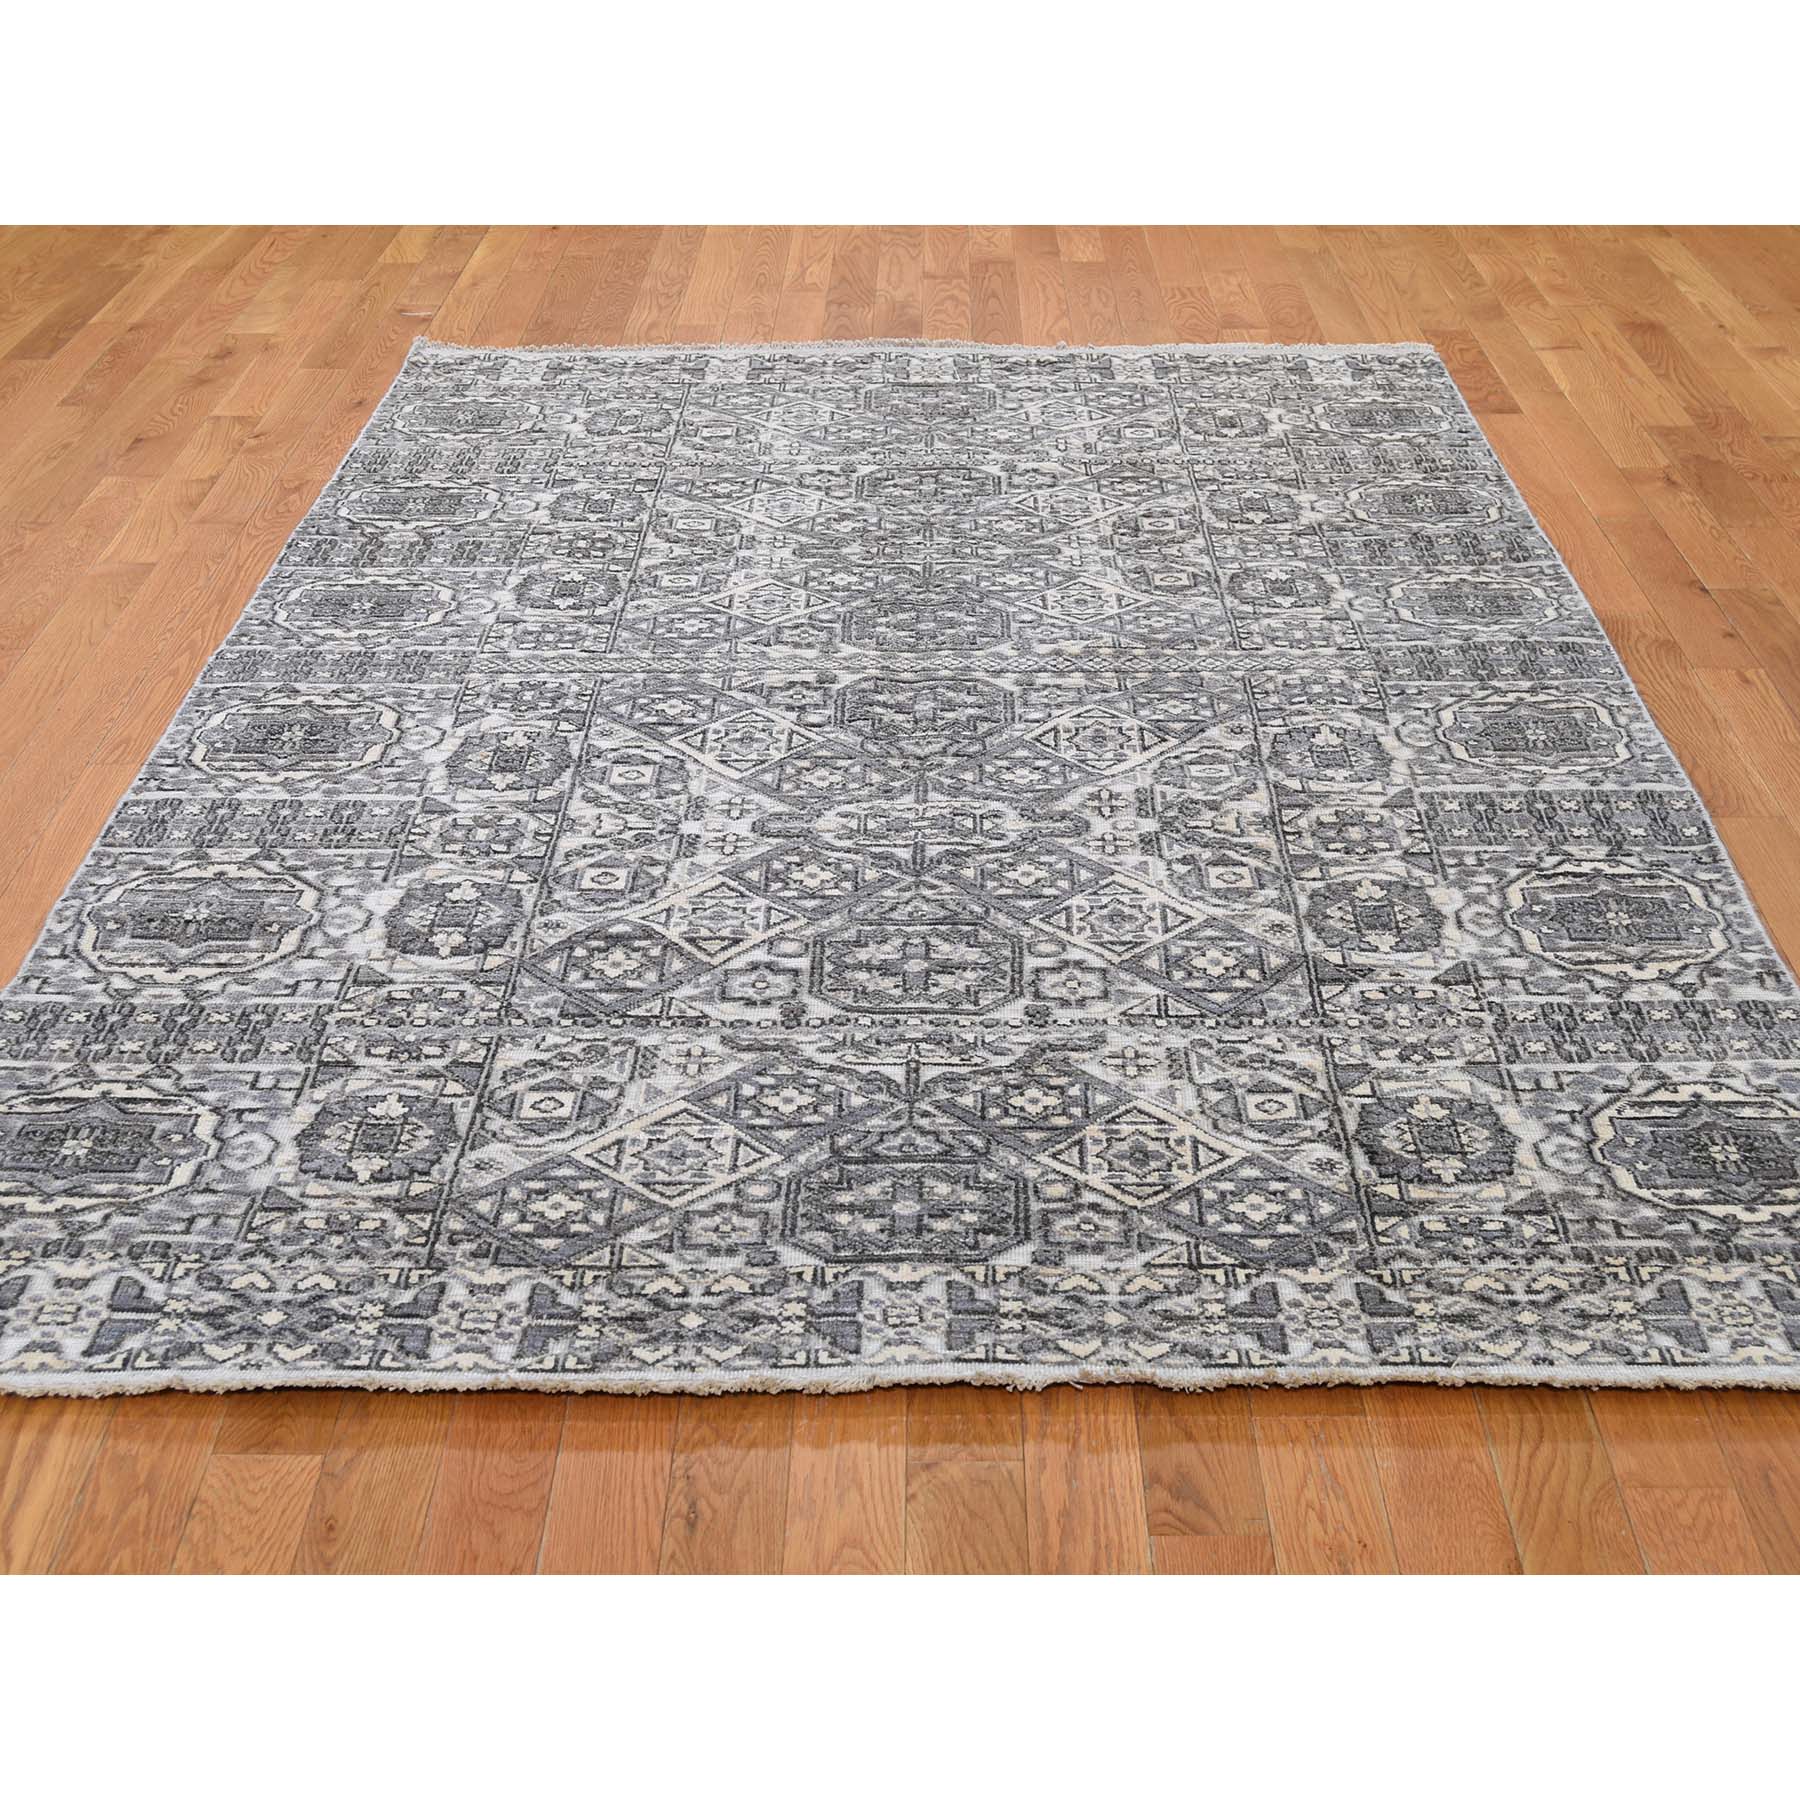 5-6 x8-2  Mamluk Design Hand-Knotted Undyed Natural Wool Oriental Rug 